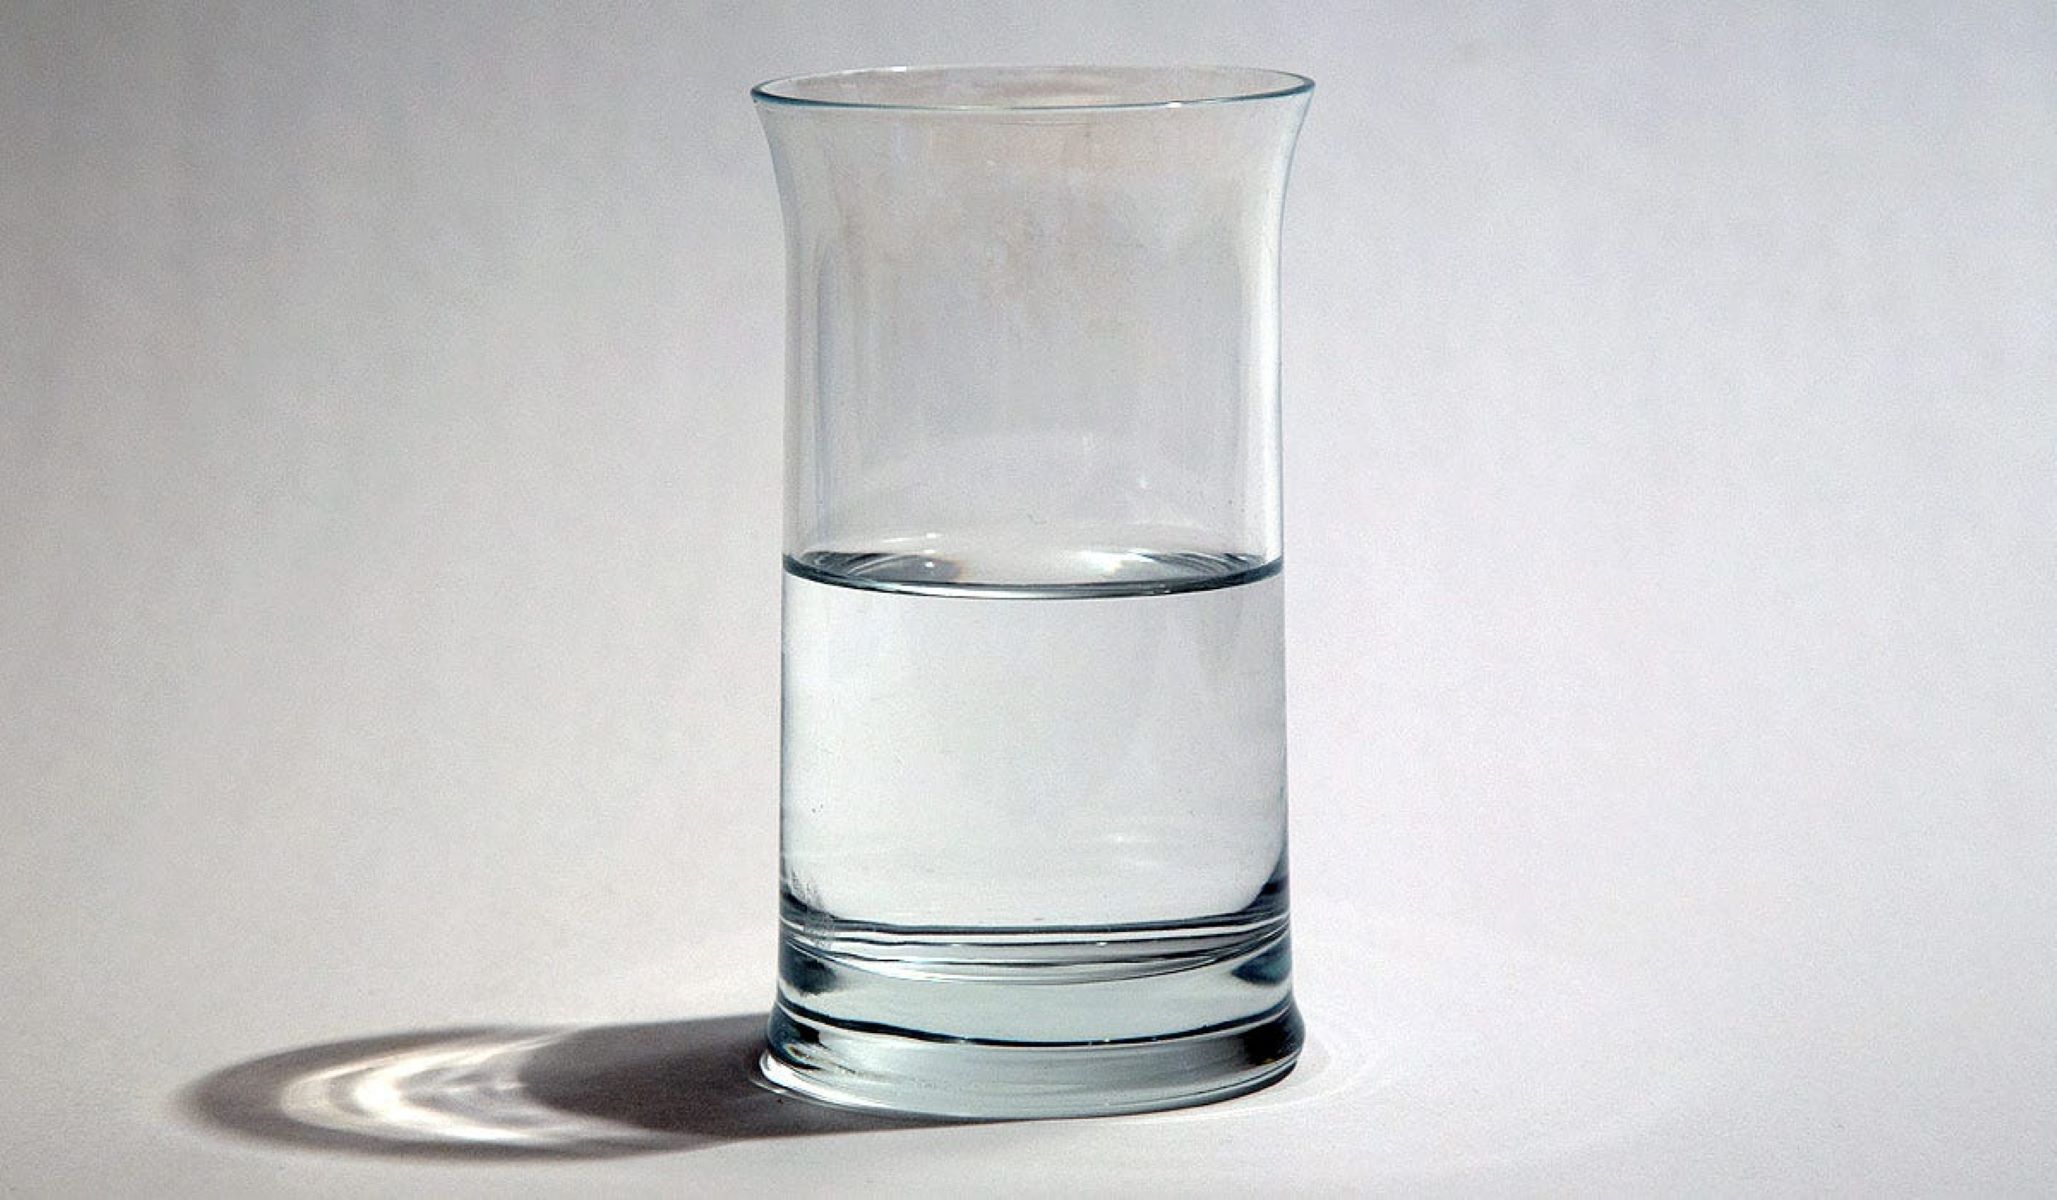 Which Symbols Represent The Ions In A Glass Of Water